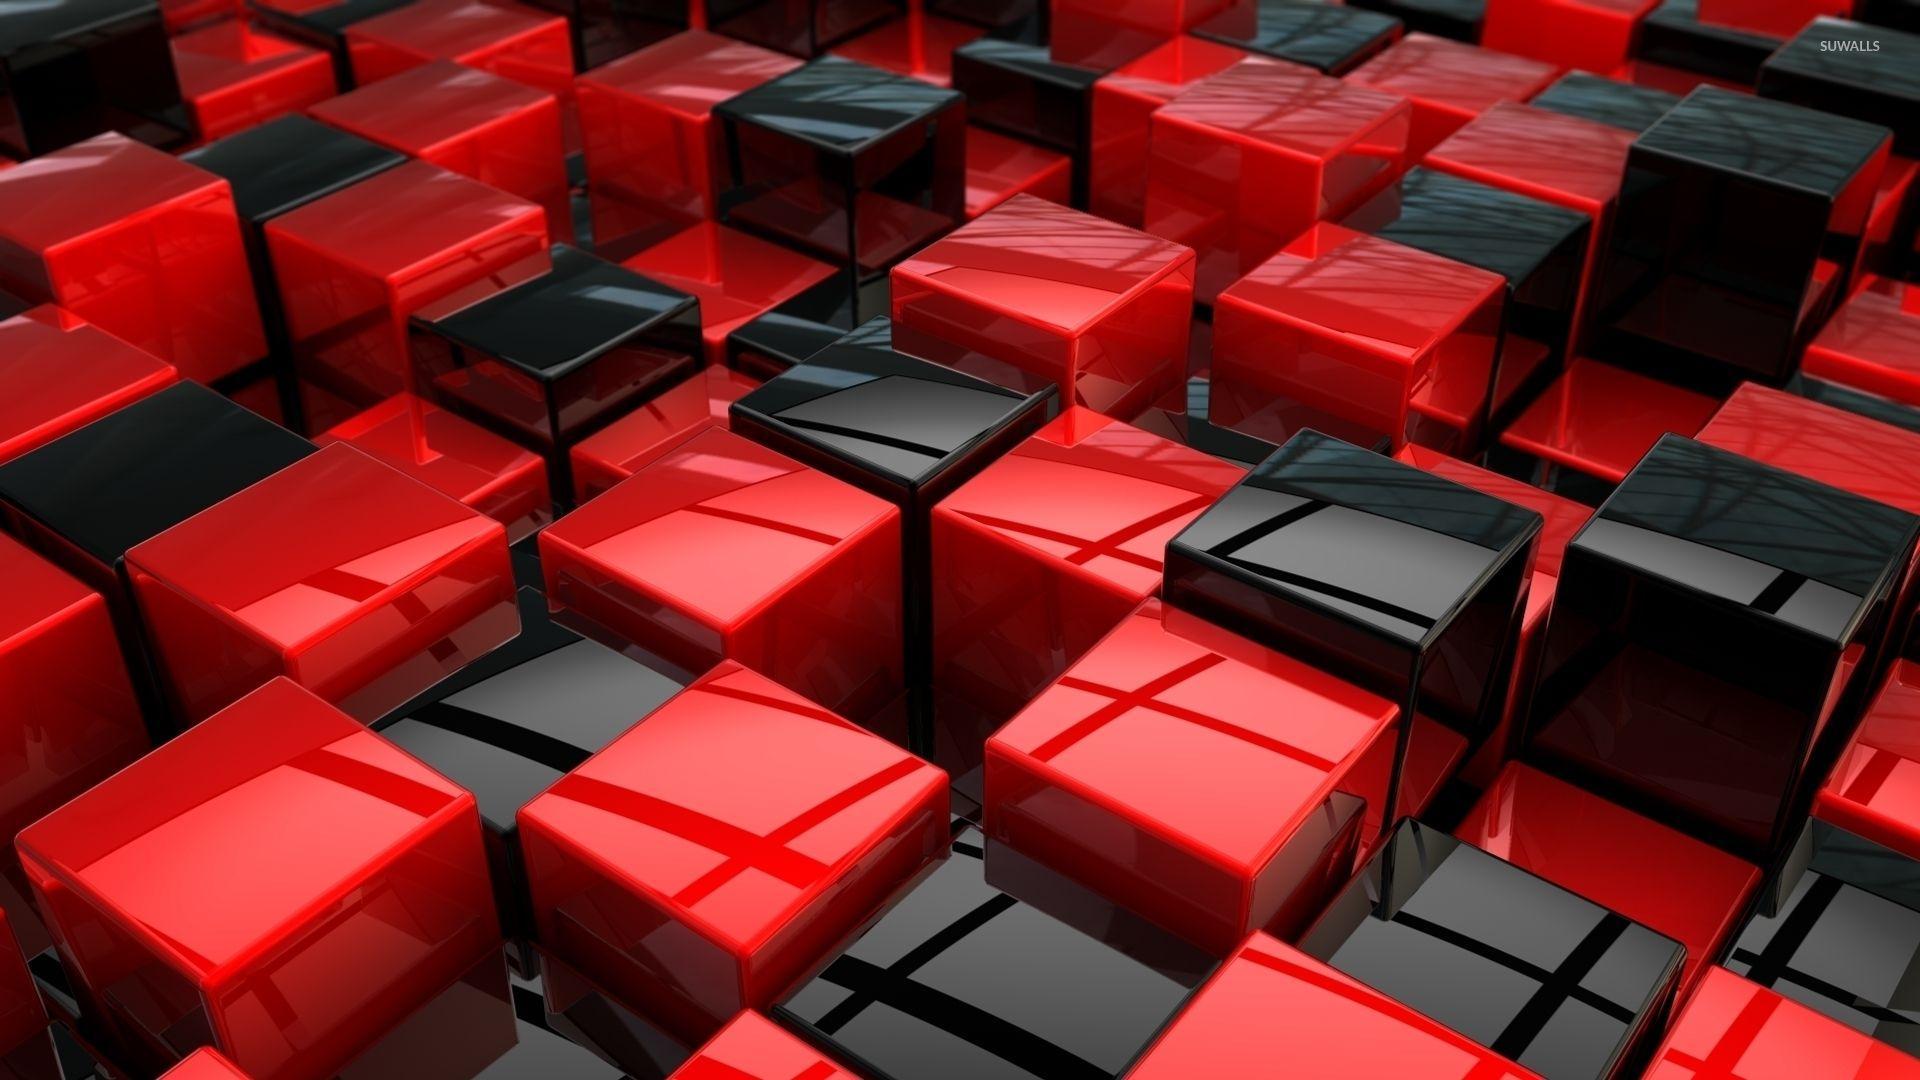 Red and black cubes wallpaper wallpaper